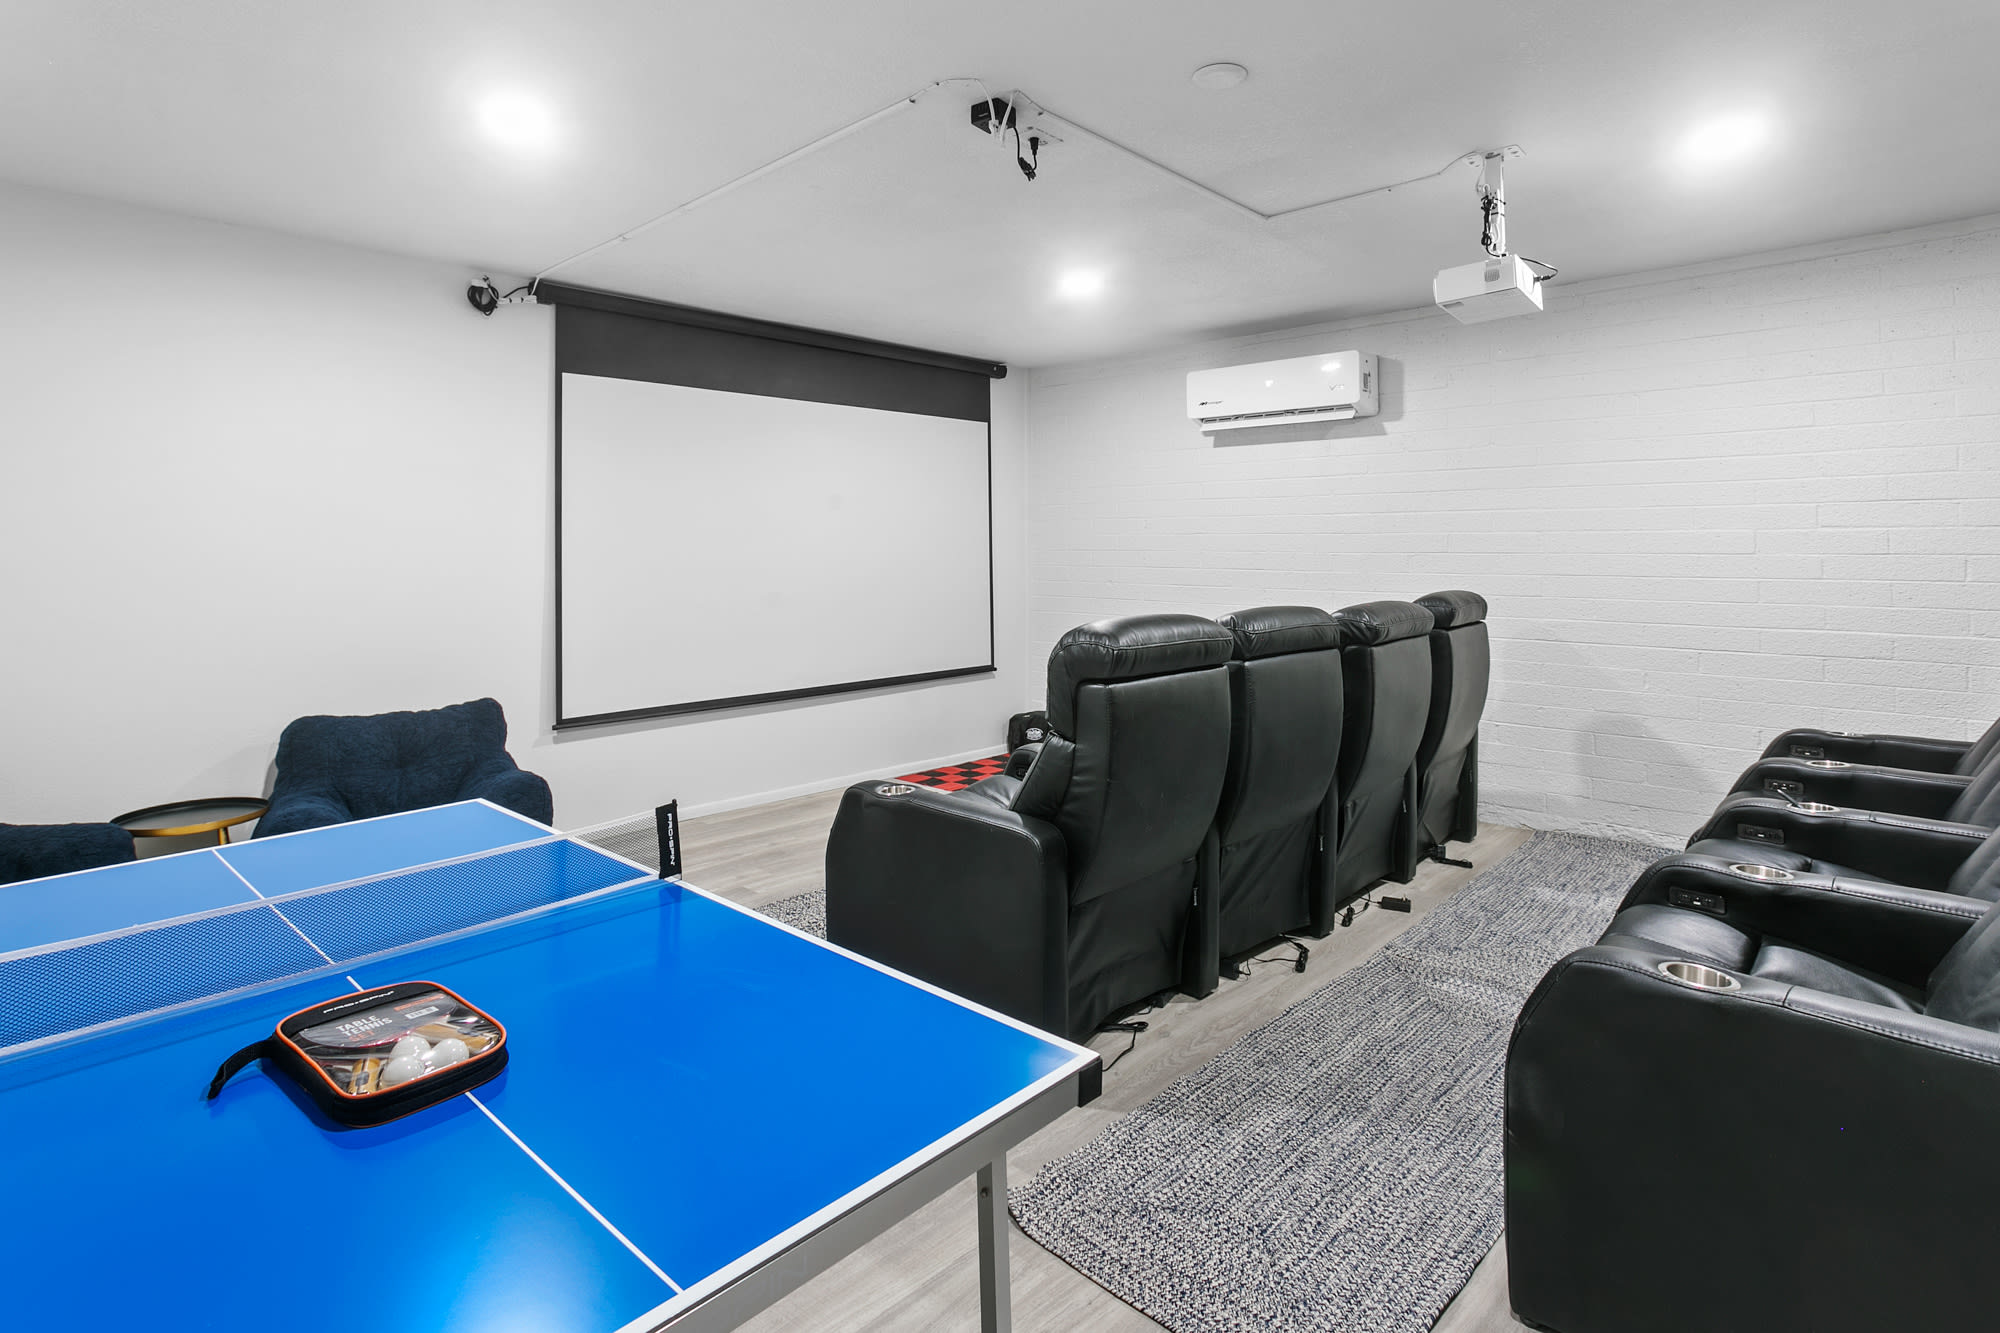 We built this awesome Movie Theatre with seating for 10... Plus ping pong!